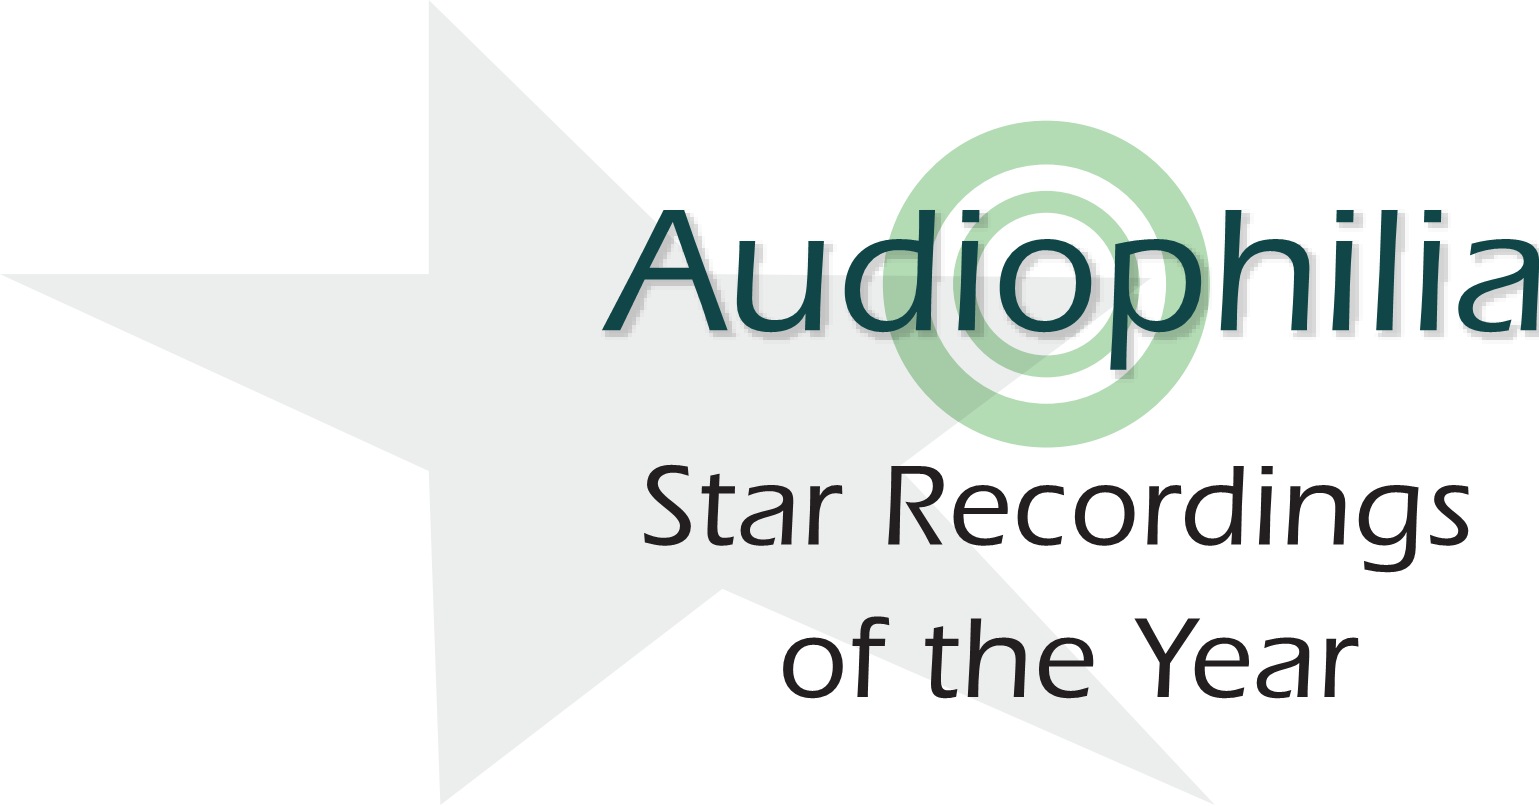 Audiophilia: 'Star Recordings of the Year' (2013)